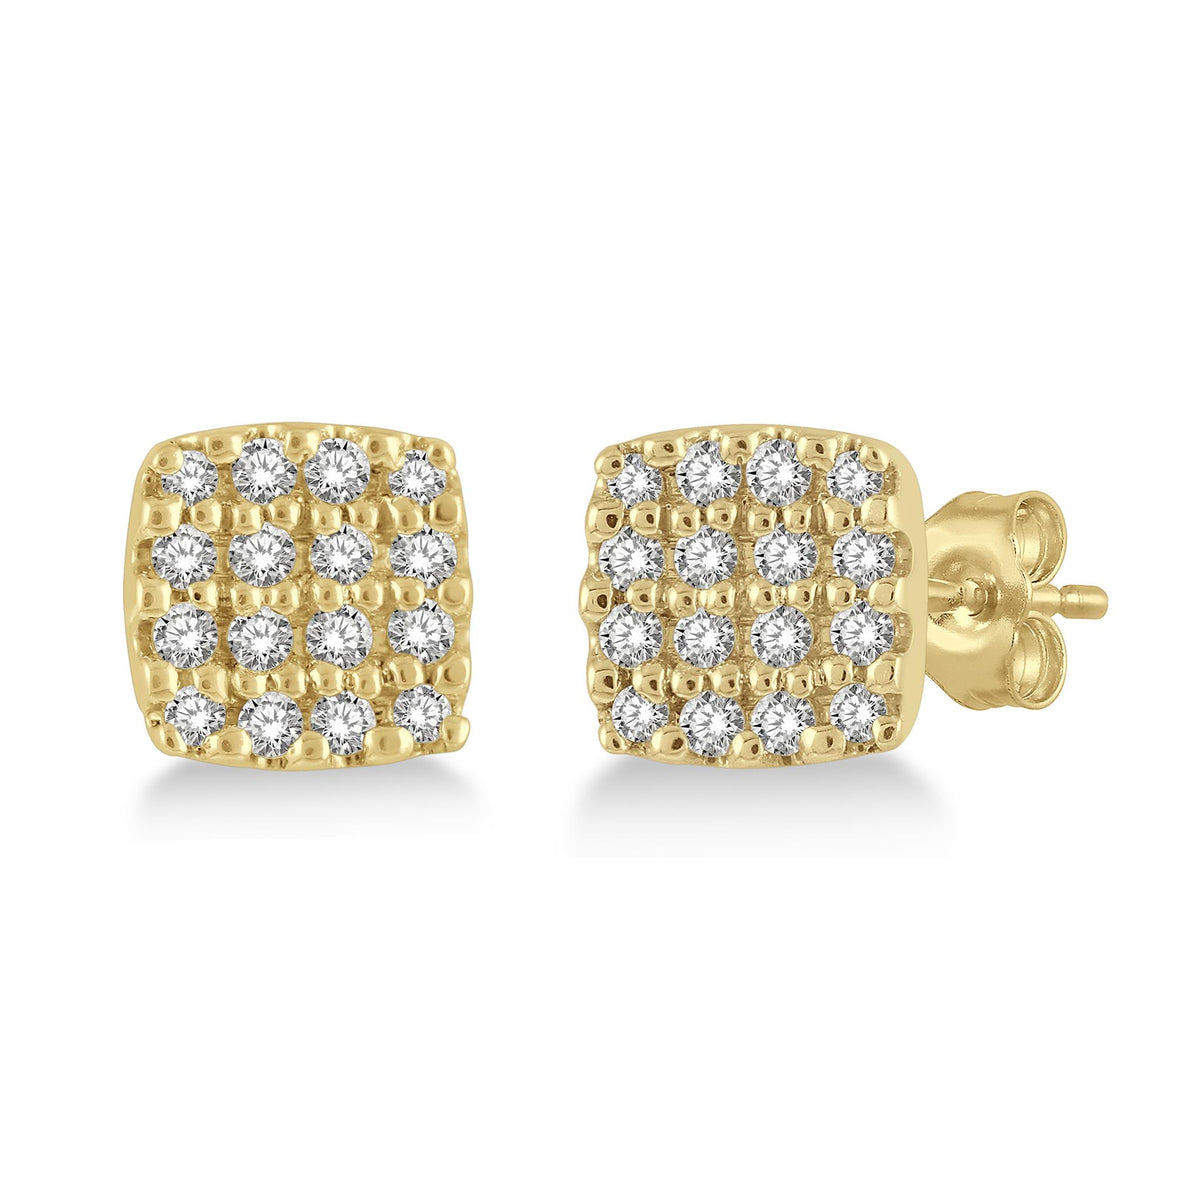 Lasker Petites-10Kt Yellow Gold Cushion Shape Earrings with 0.12cttw Natural Diamonds